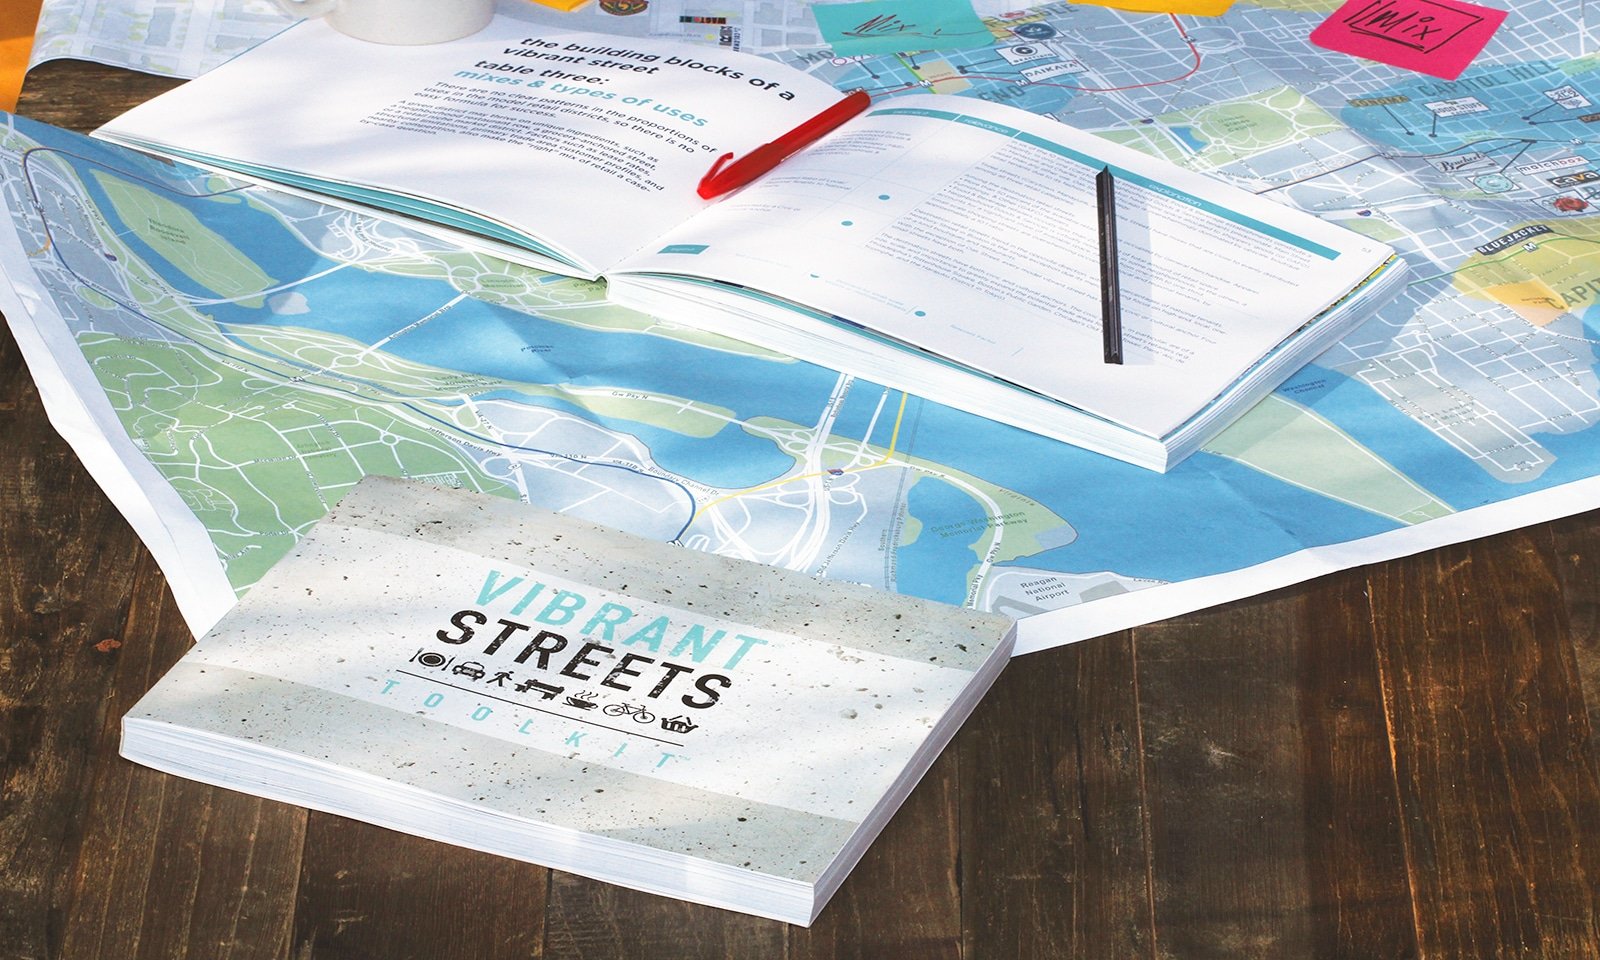 Book view of the Vibrant Streets Toolkit